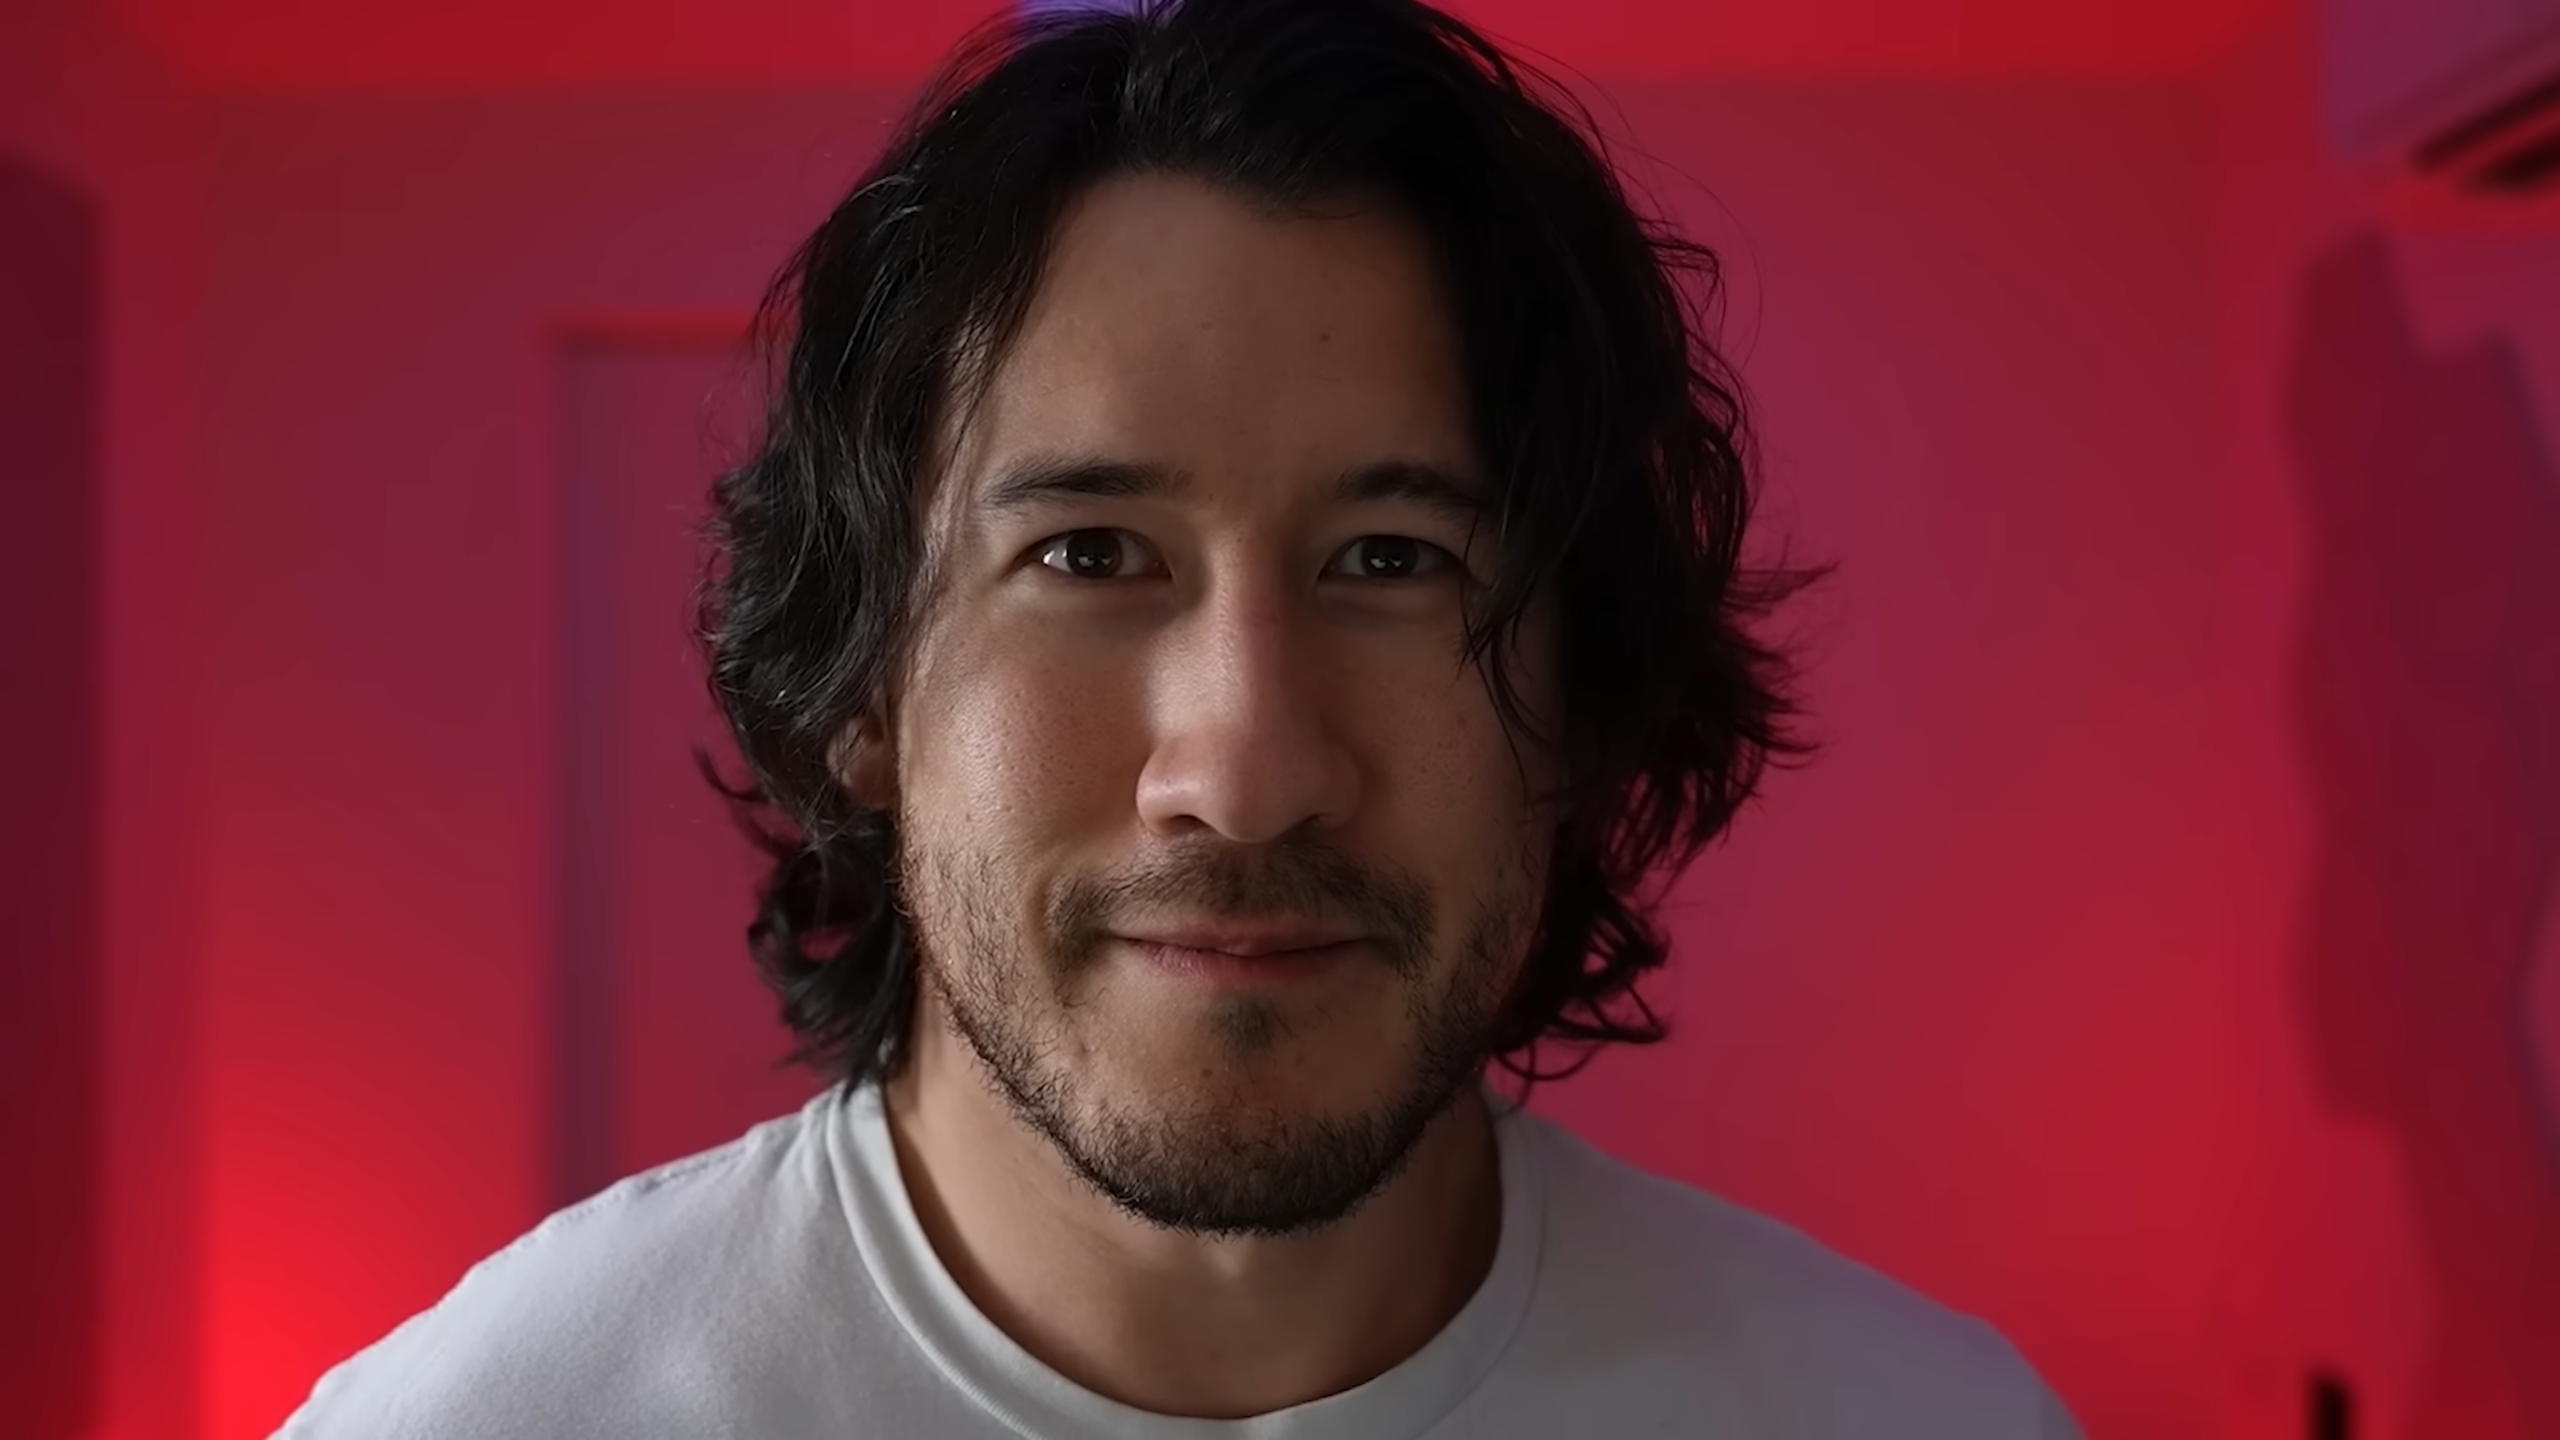 Iron Lung’s new ‘Markiplier mode’ surrounds you with the YouTuber’s meme faces while you explore the depths of the blood ocean